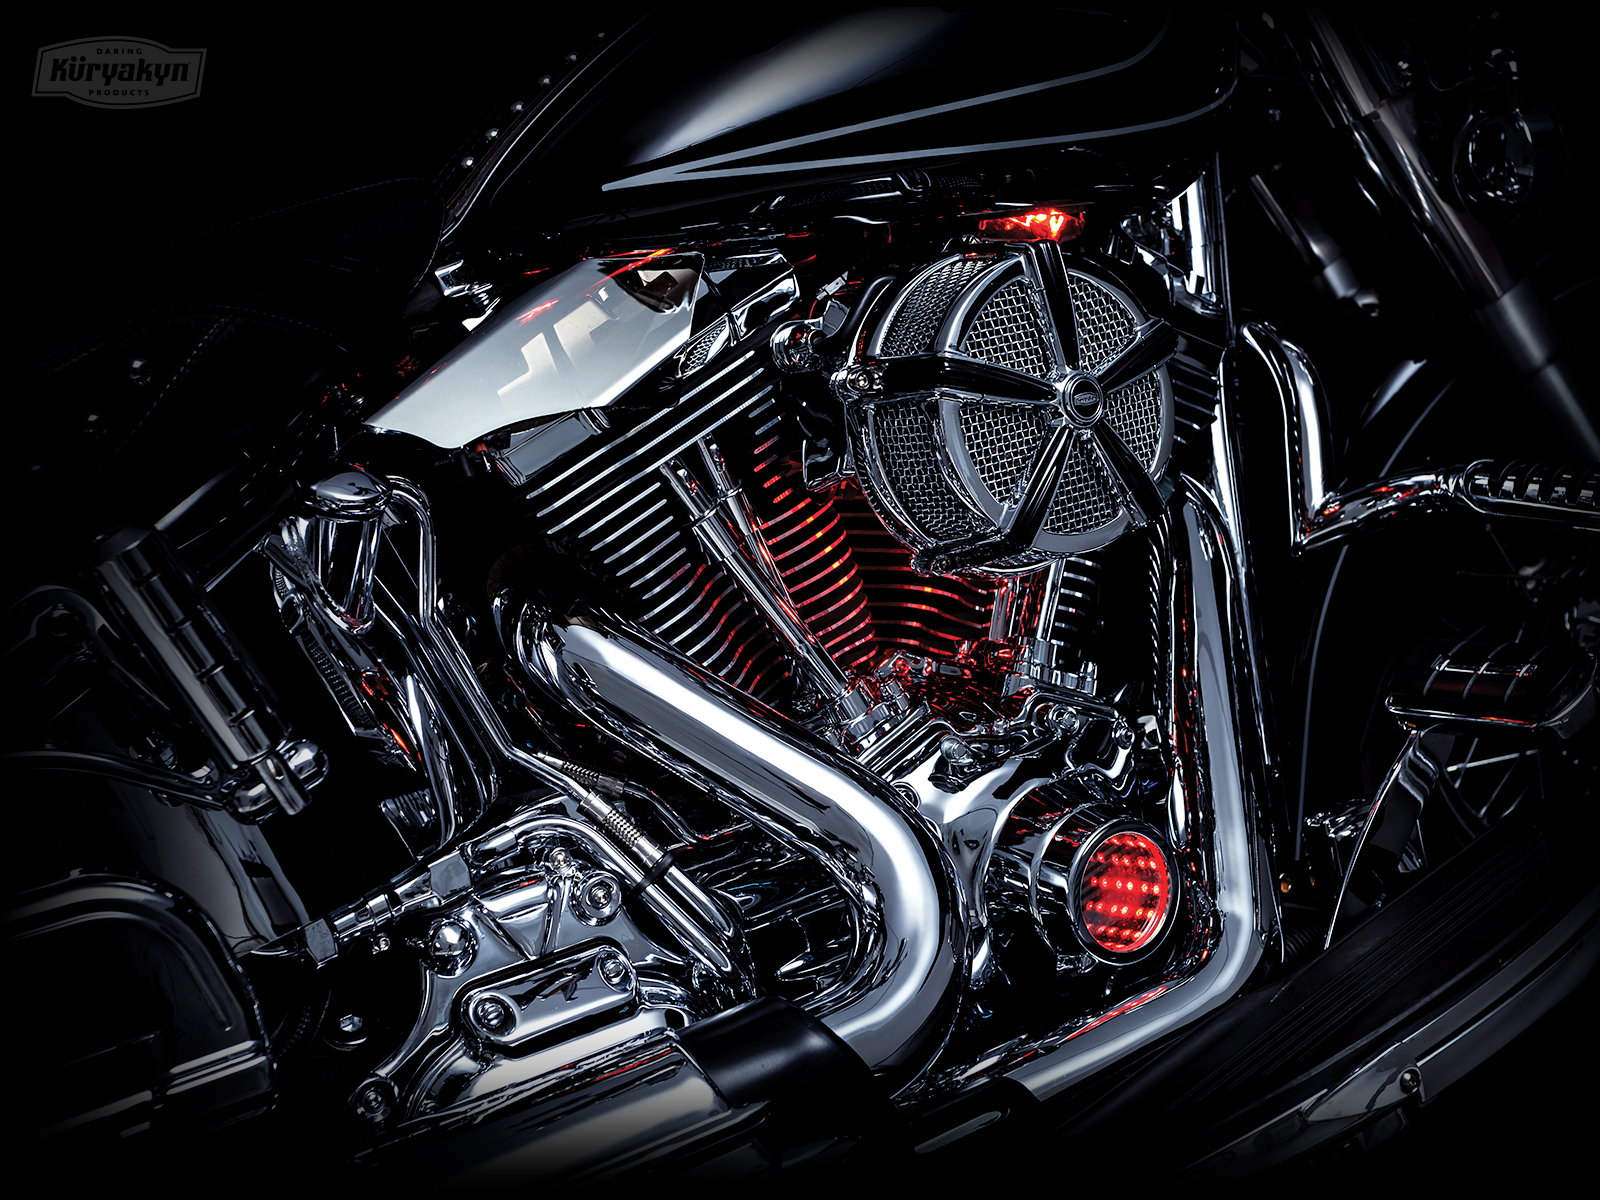 Wallpaper Motorcycle Parts And Accessories For Harley Metric